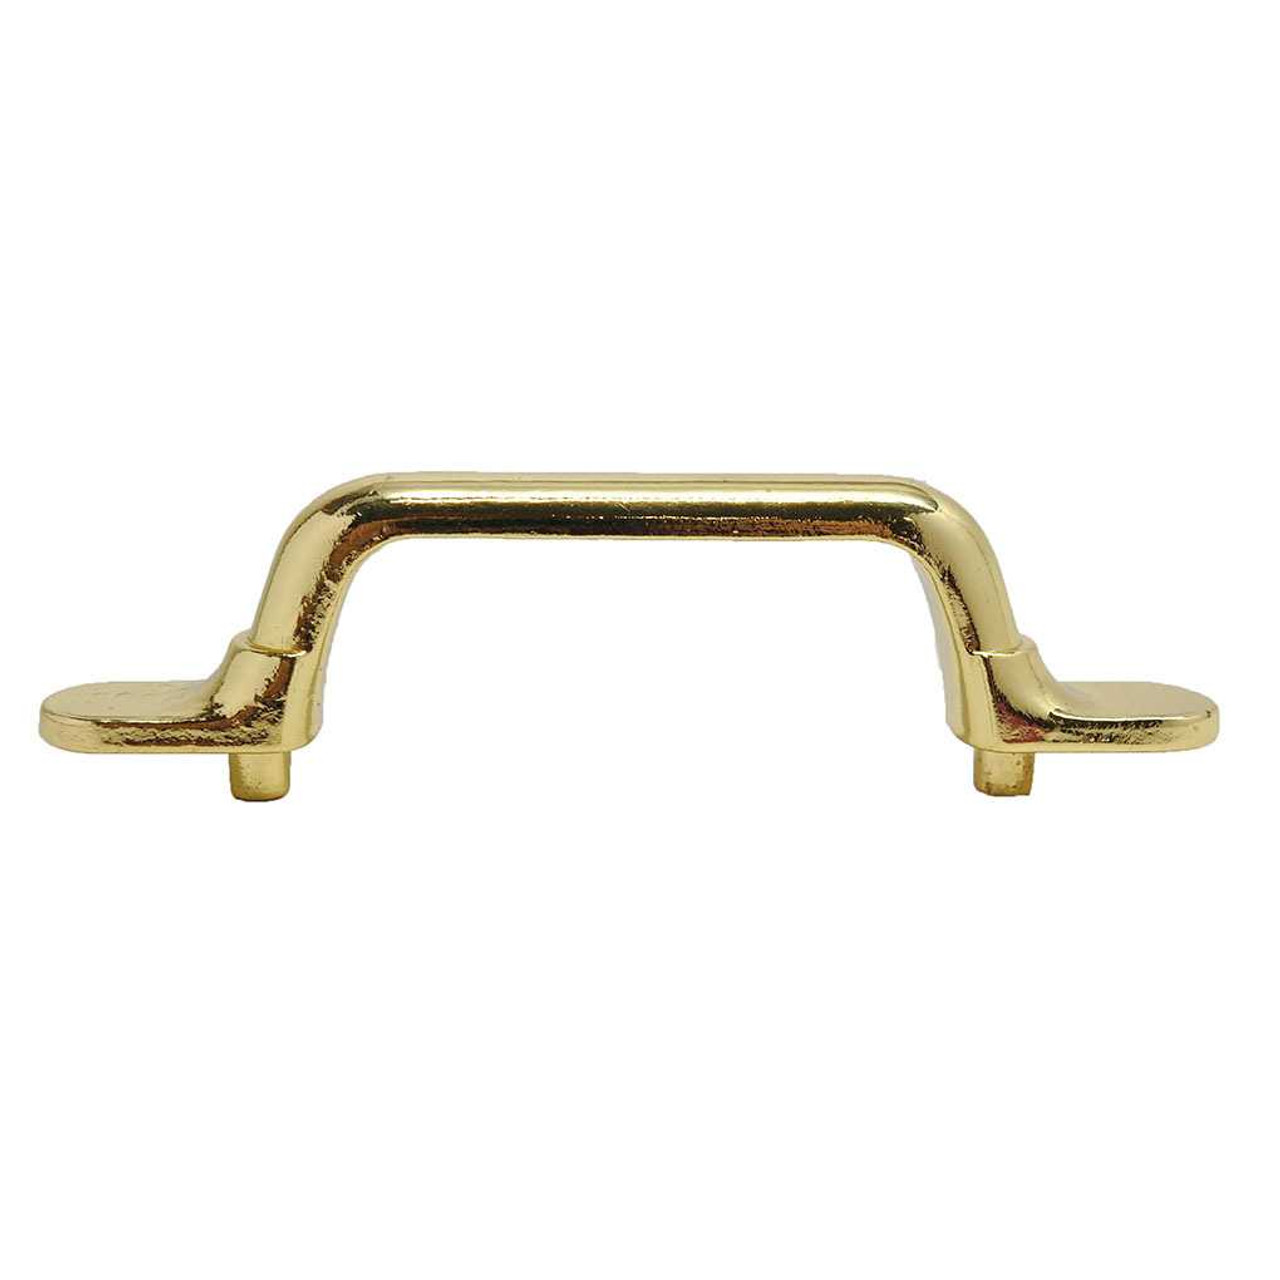 Keeler Ultra Brass 3 Handle Cabinet Pull - The Knob Shop